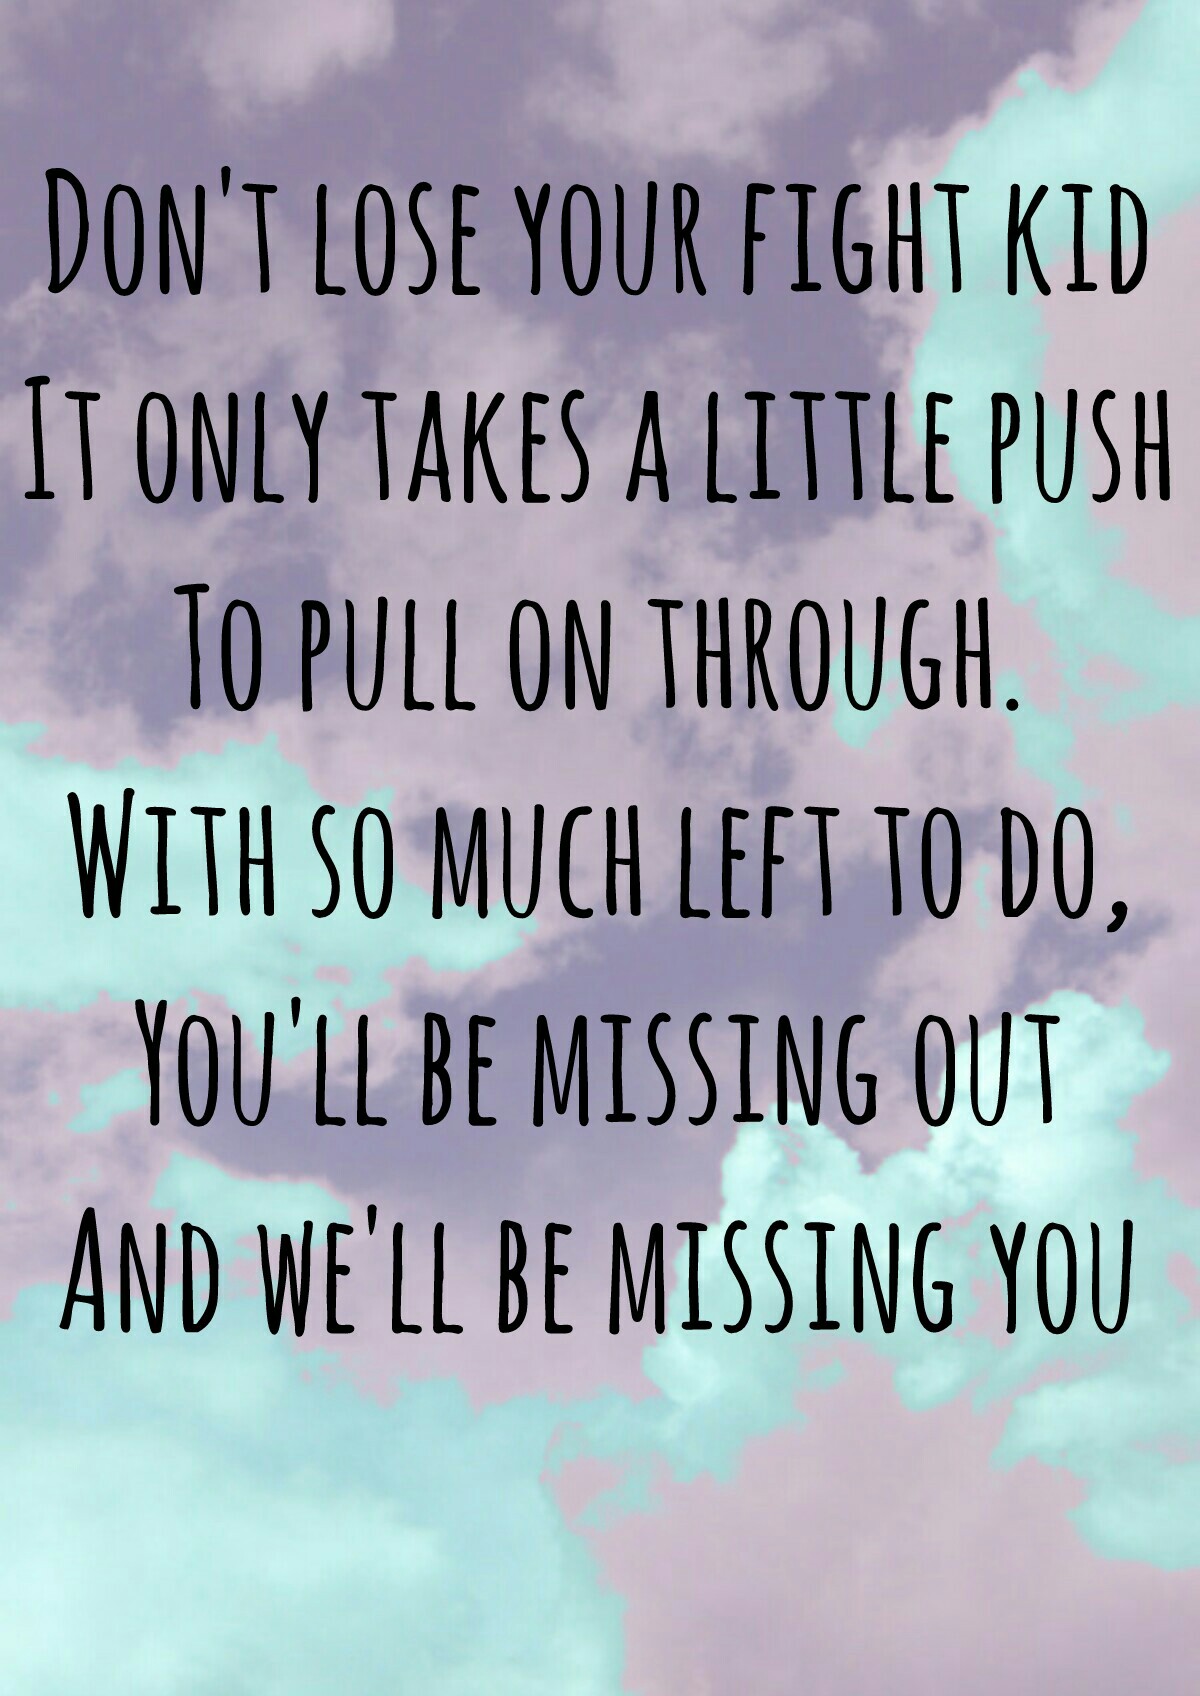 missing you -All Time Low